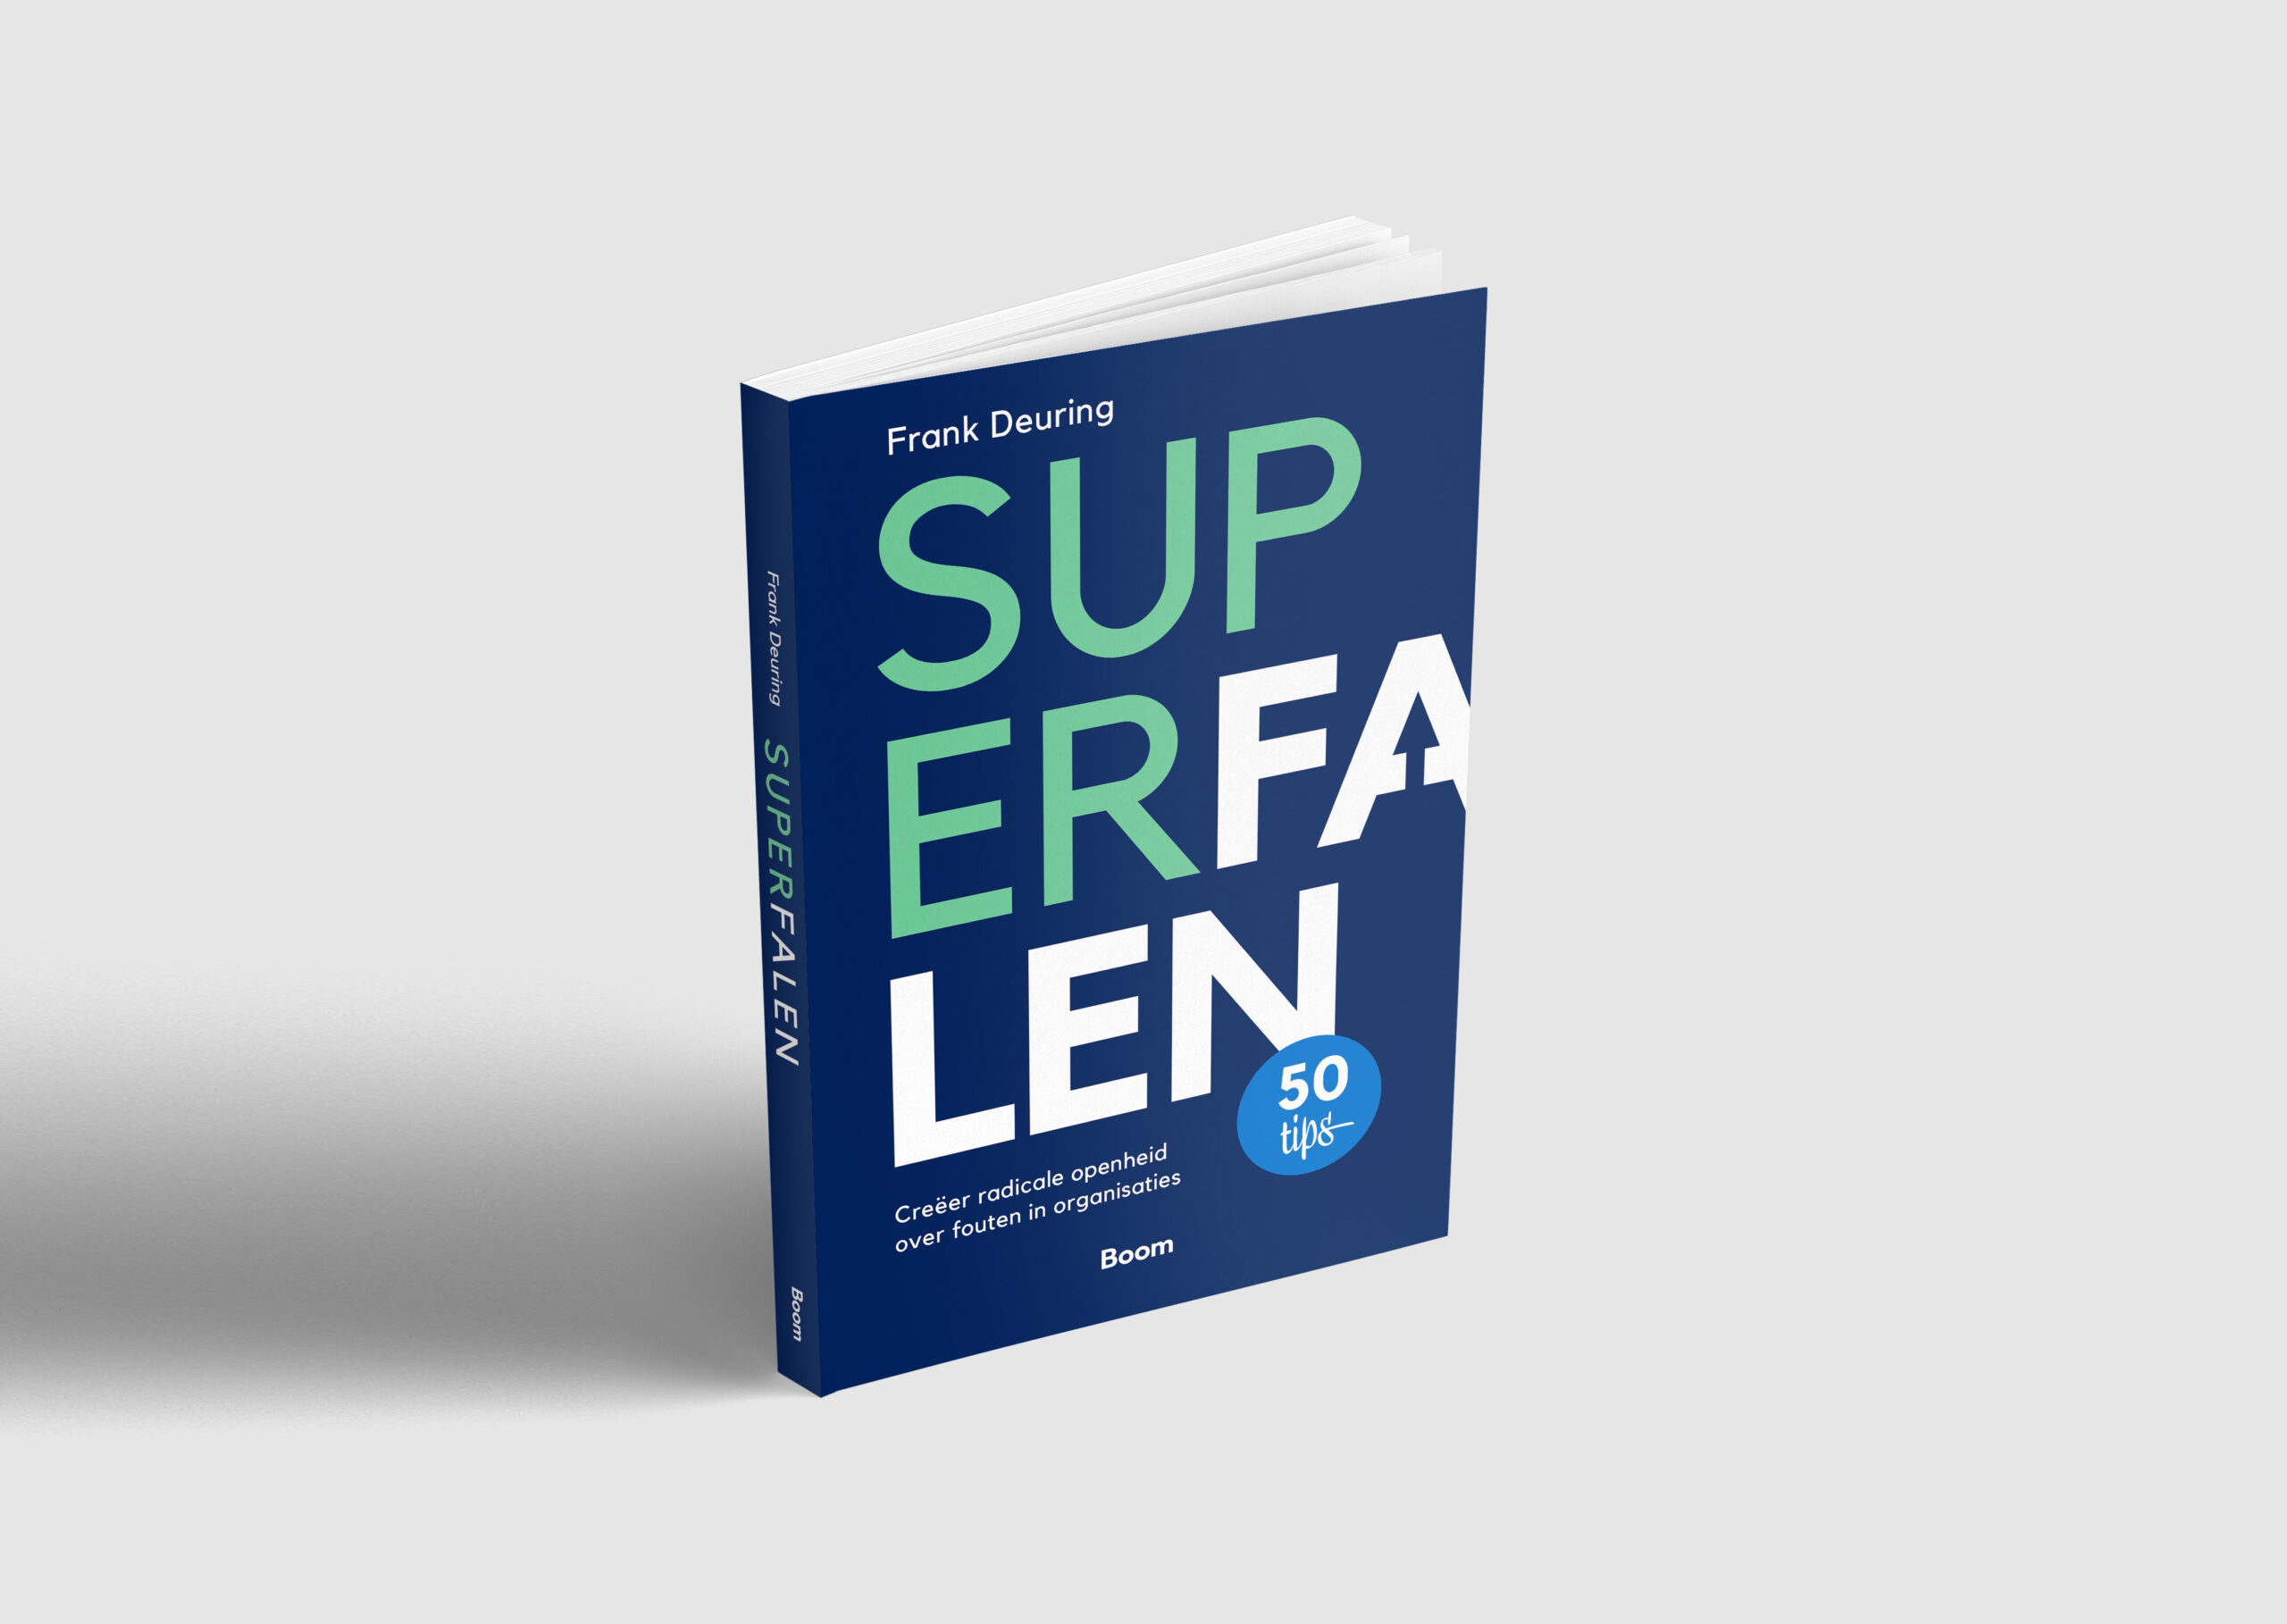 ‘SuperFalen’ – creating radical openness about mistakes